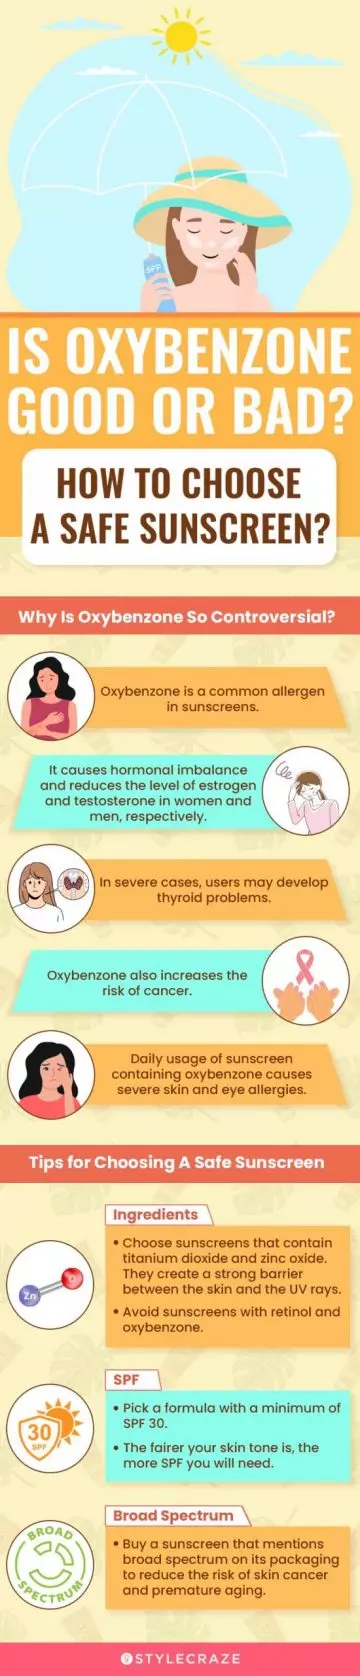 Is Oxybenzone Good Or Bad? Sunscreen (infographic)